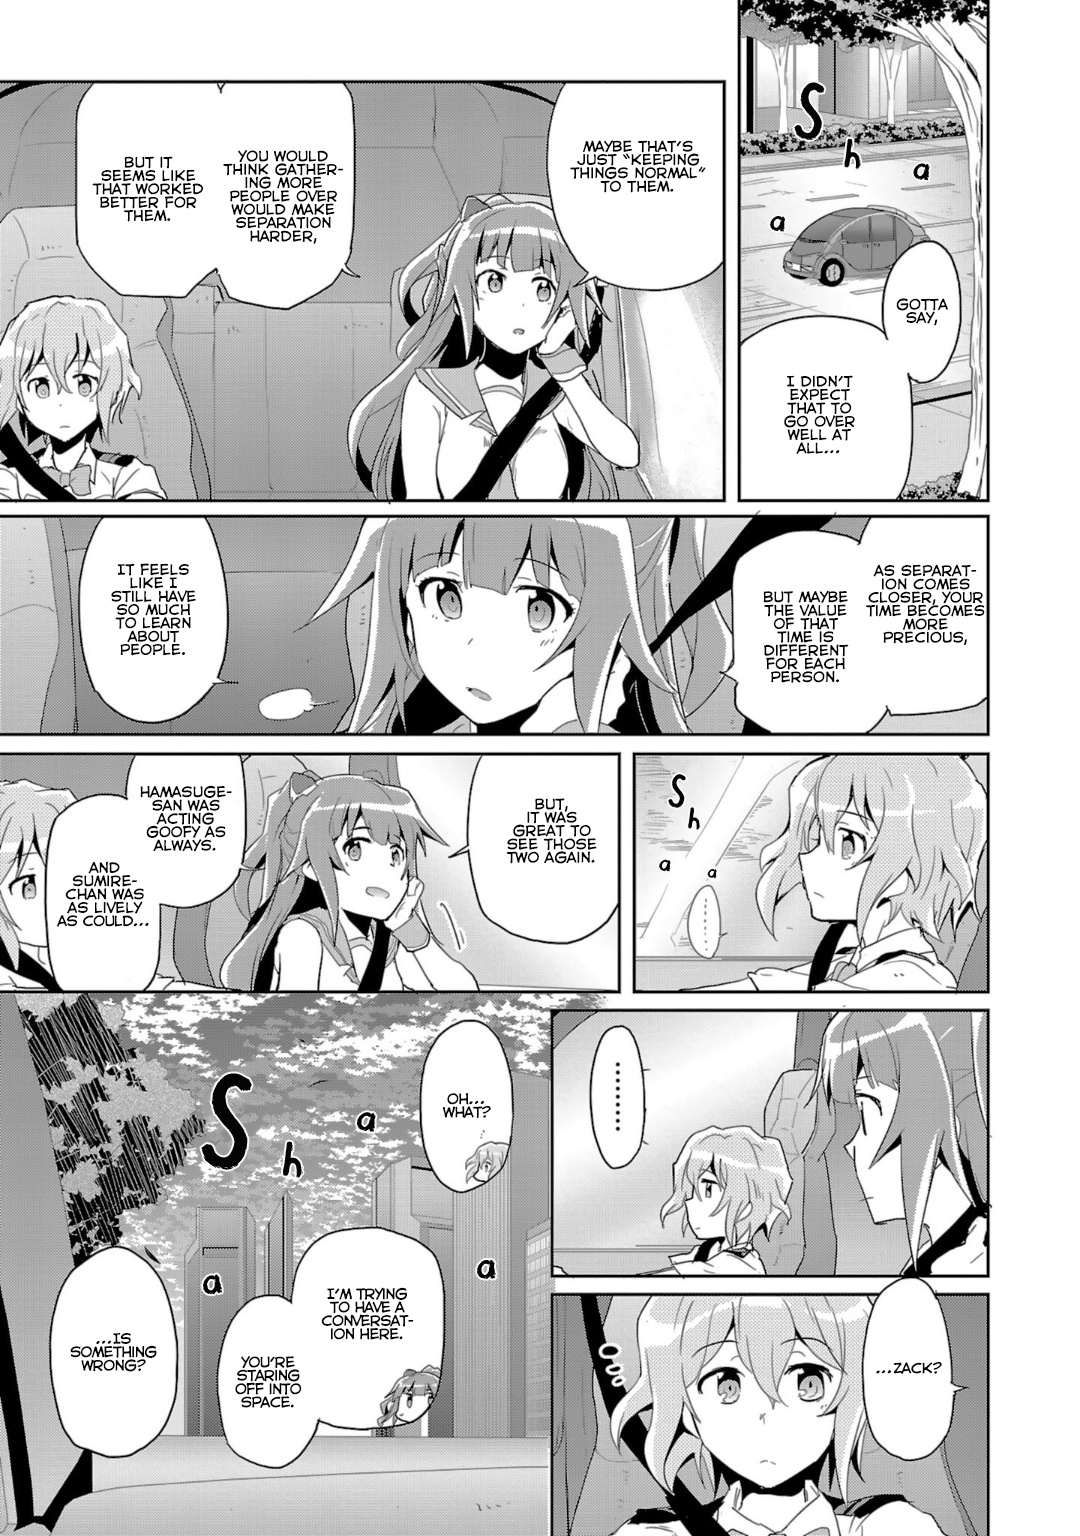 Plastic Memories - Say To Good-Bye Vol.3 Chapter 18: Memories: 18 - Picture 3